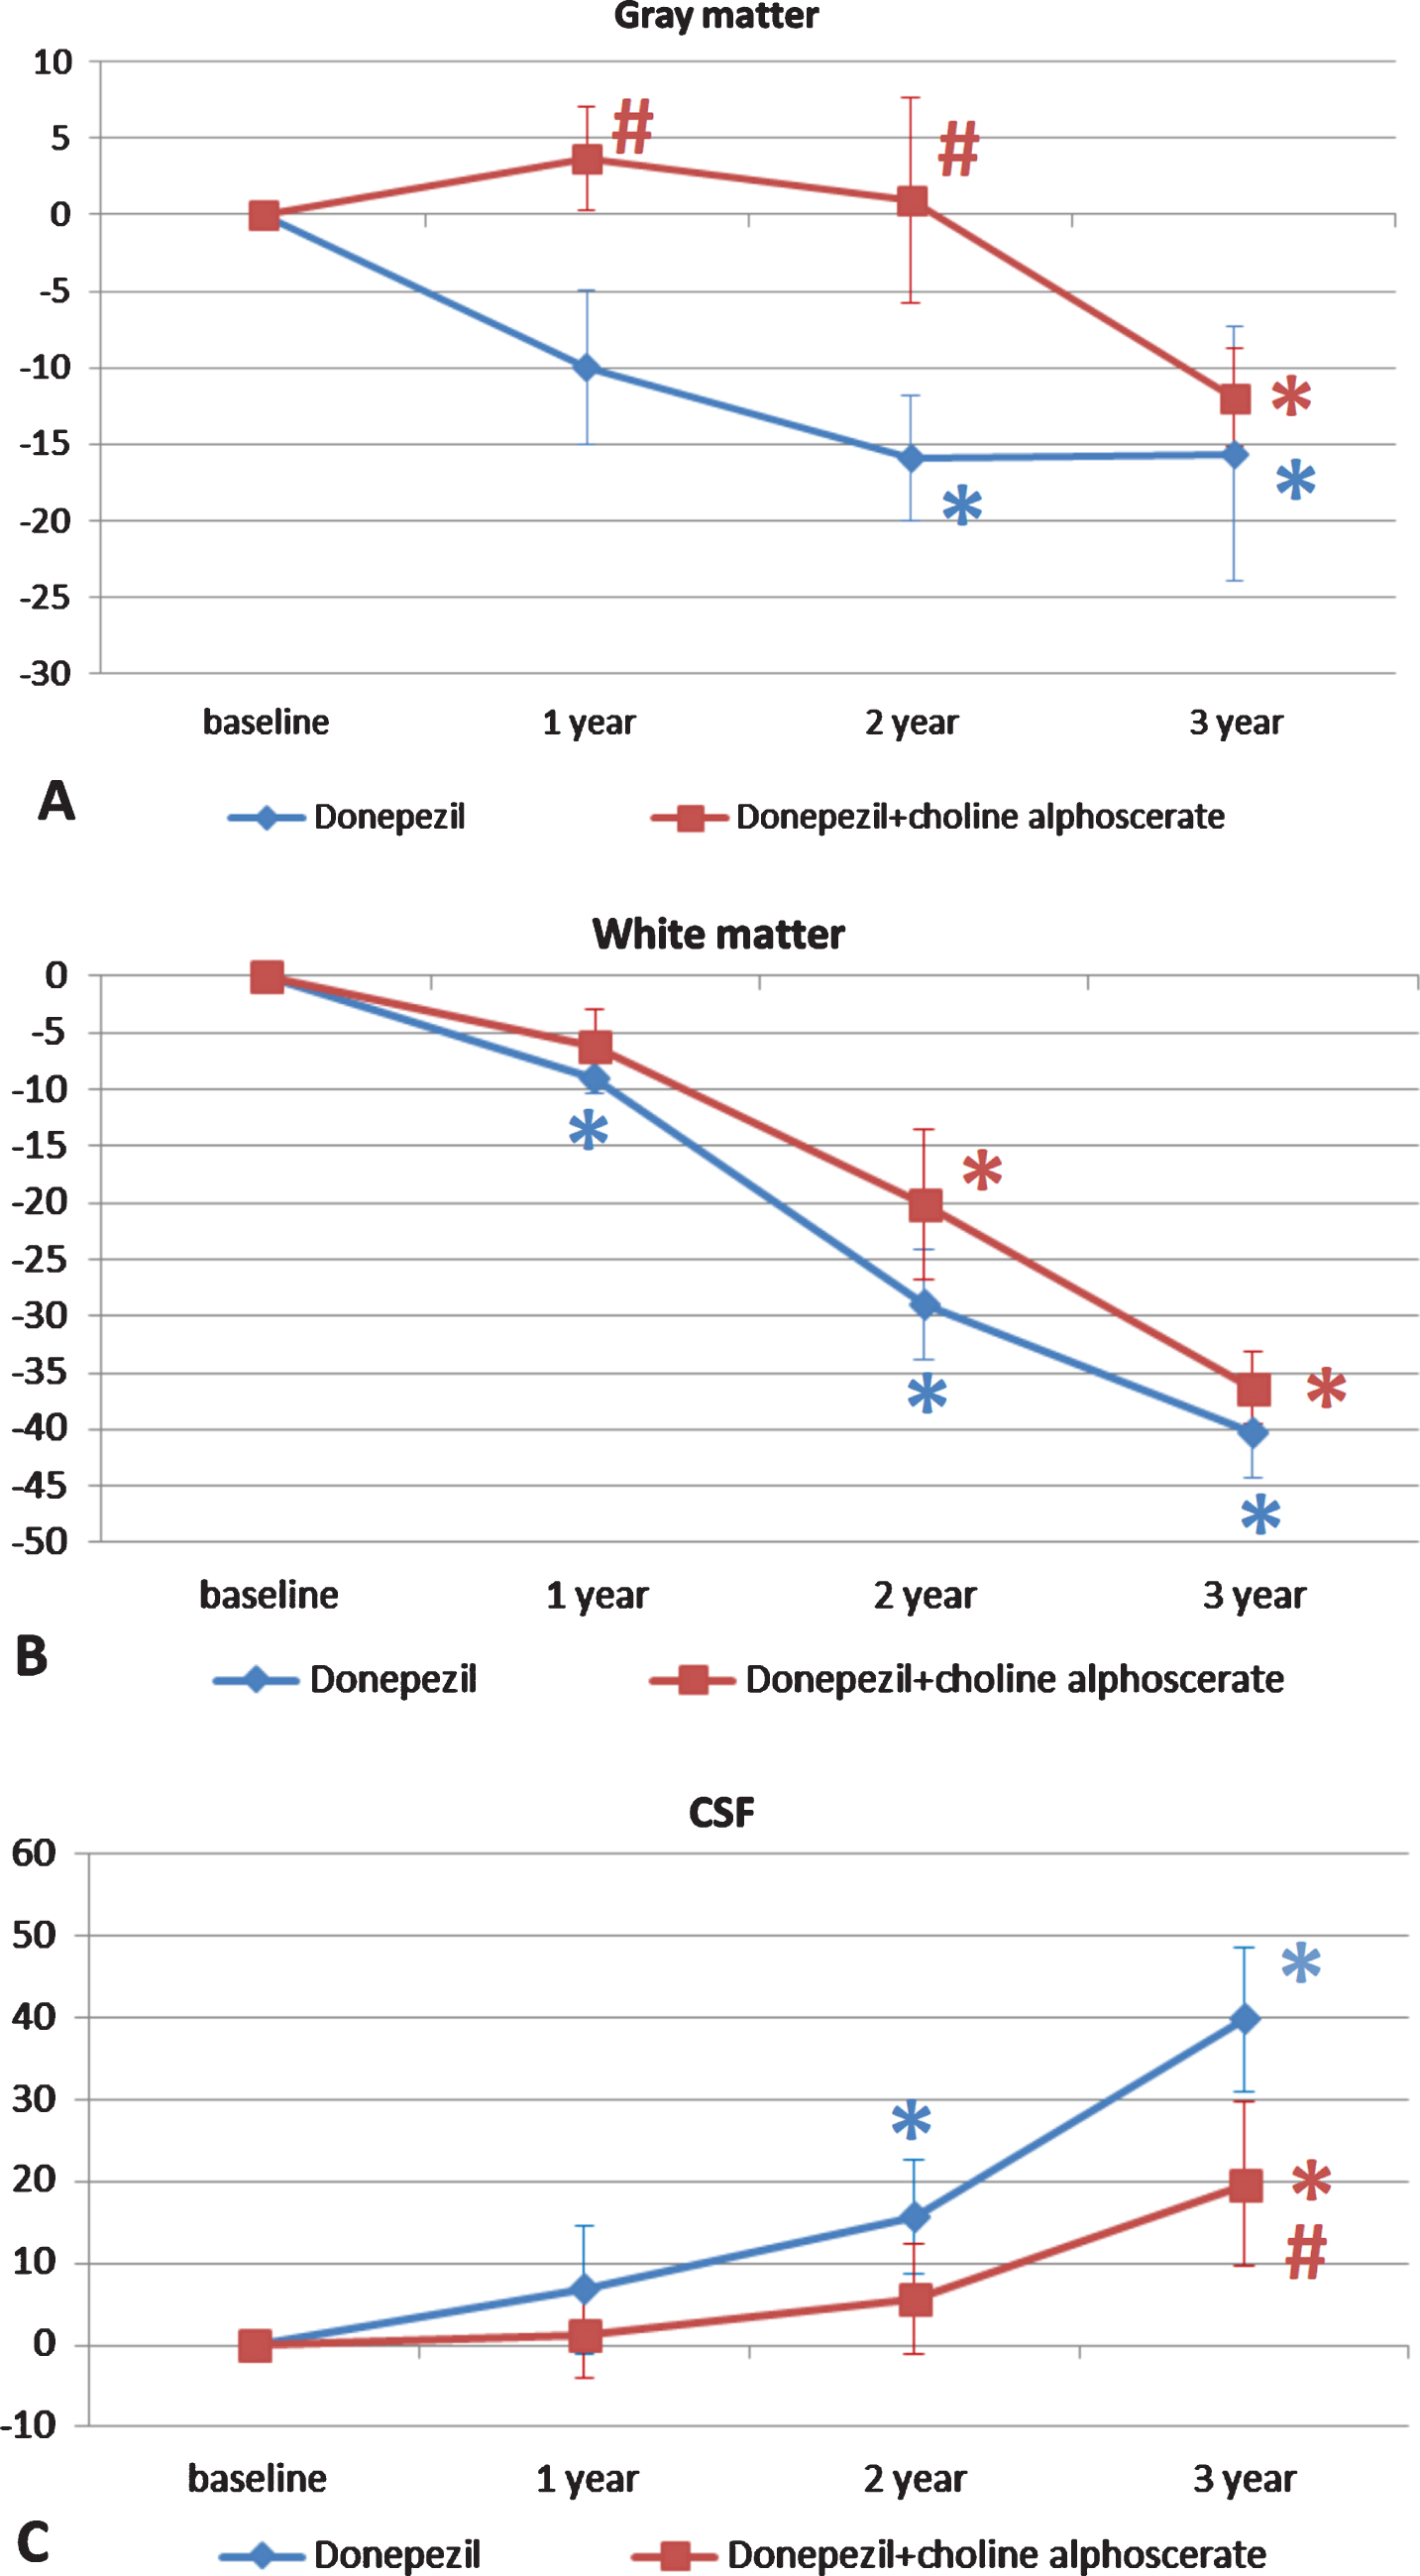 Changes in the percentage of gray (A) and white matter (B), and CSF volumes (C) in the two groups of patients over the three years of observation. The data are means of the percentage variation ± S.E.M. *p < 0.05 versus baseline; #p < 0.05 versus donepezil and placebo.